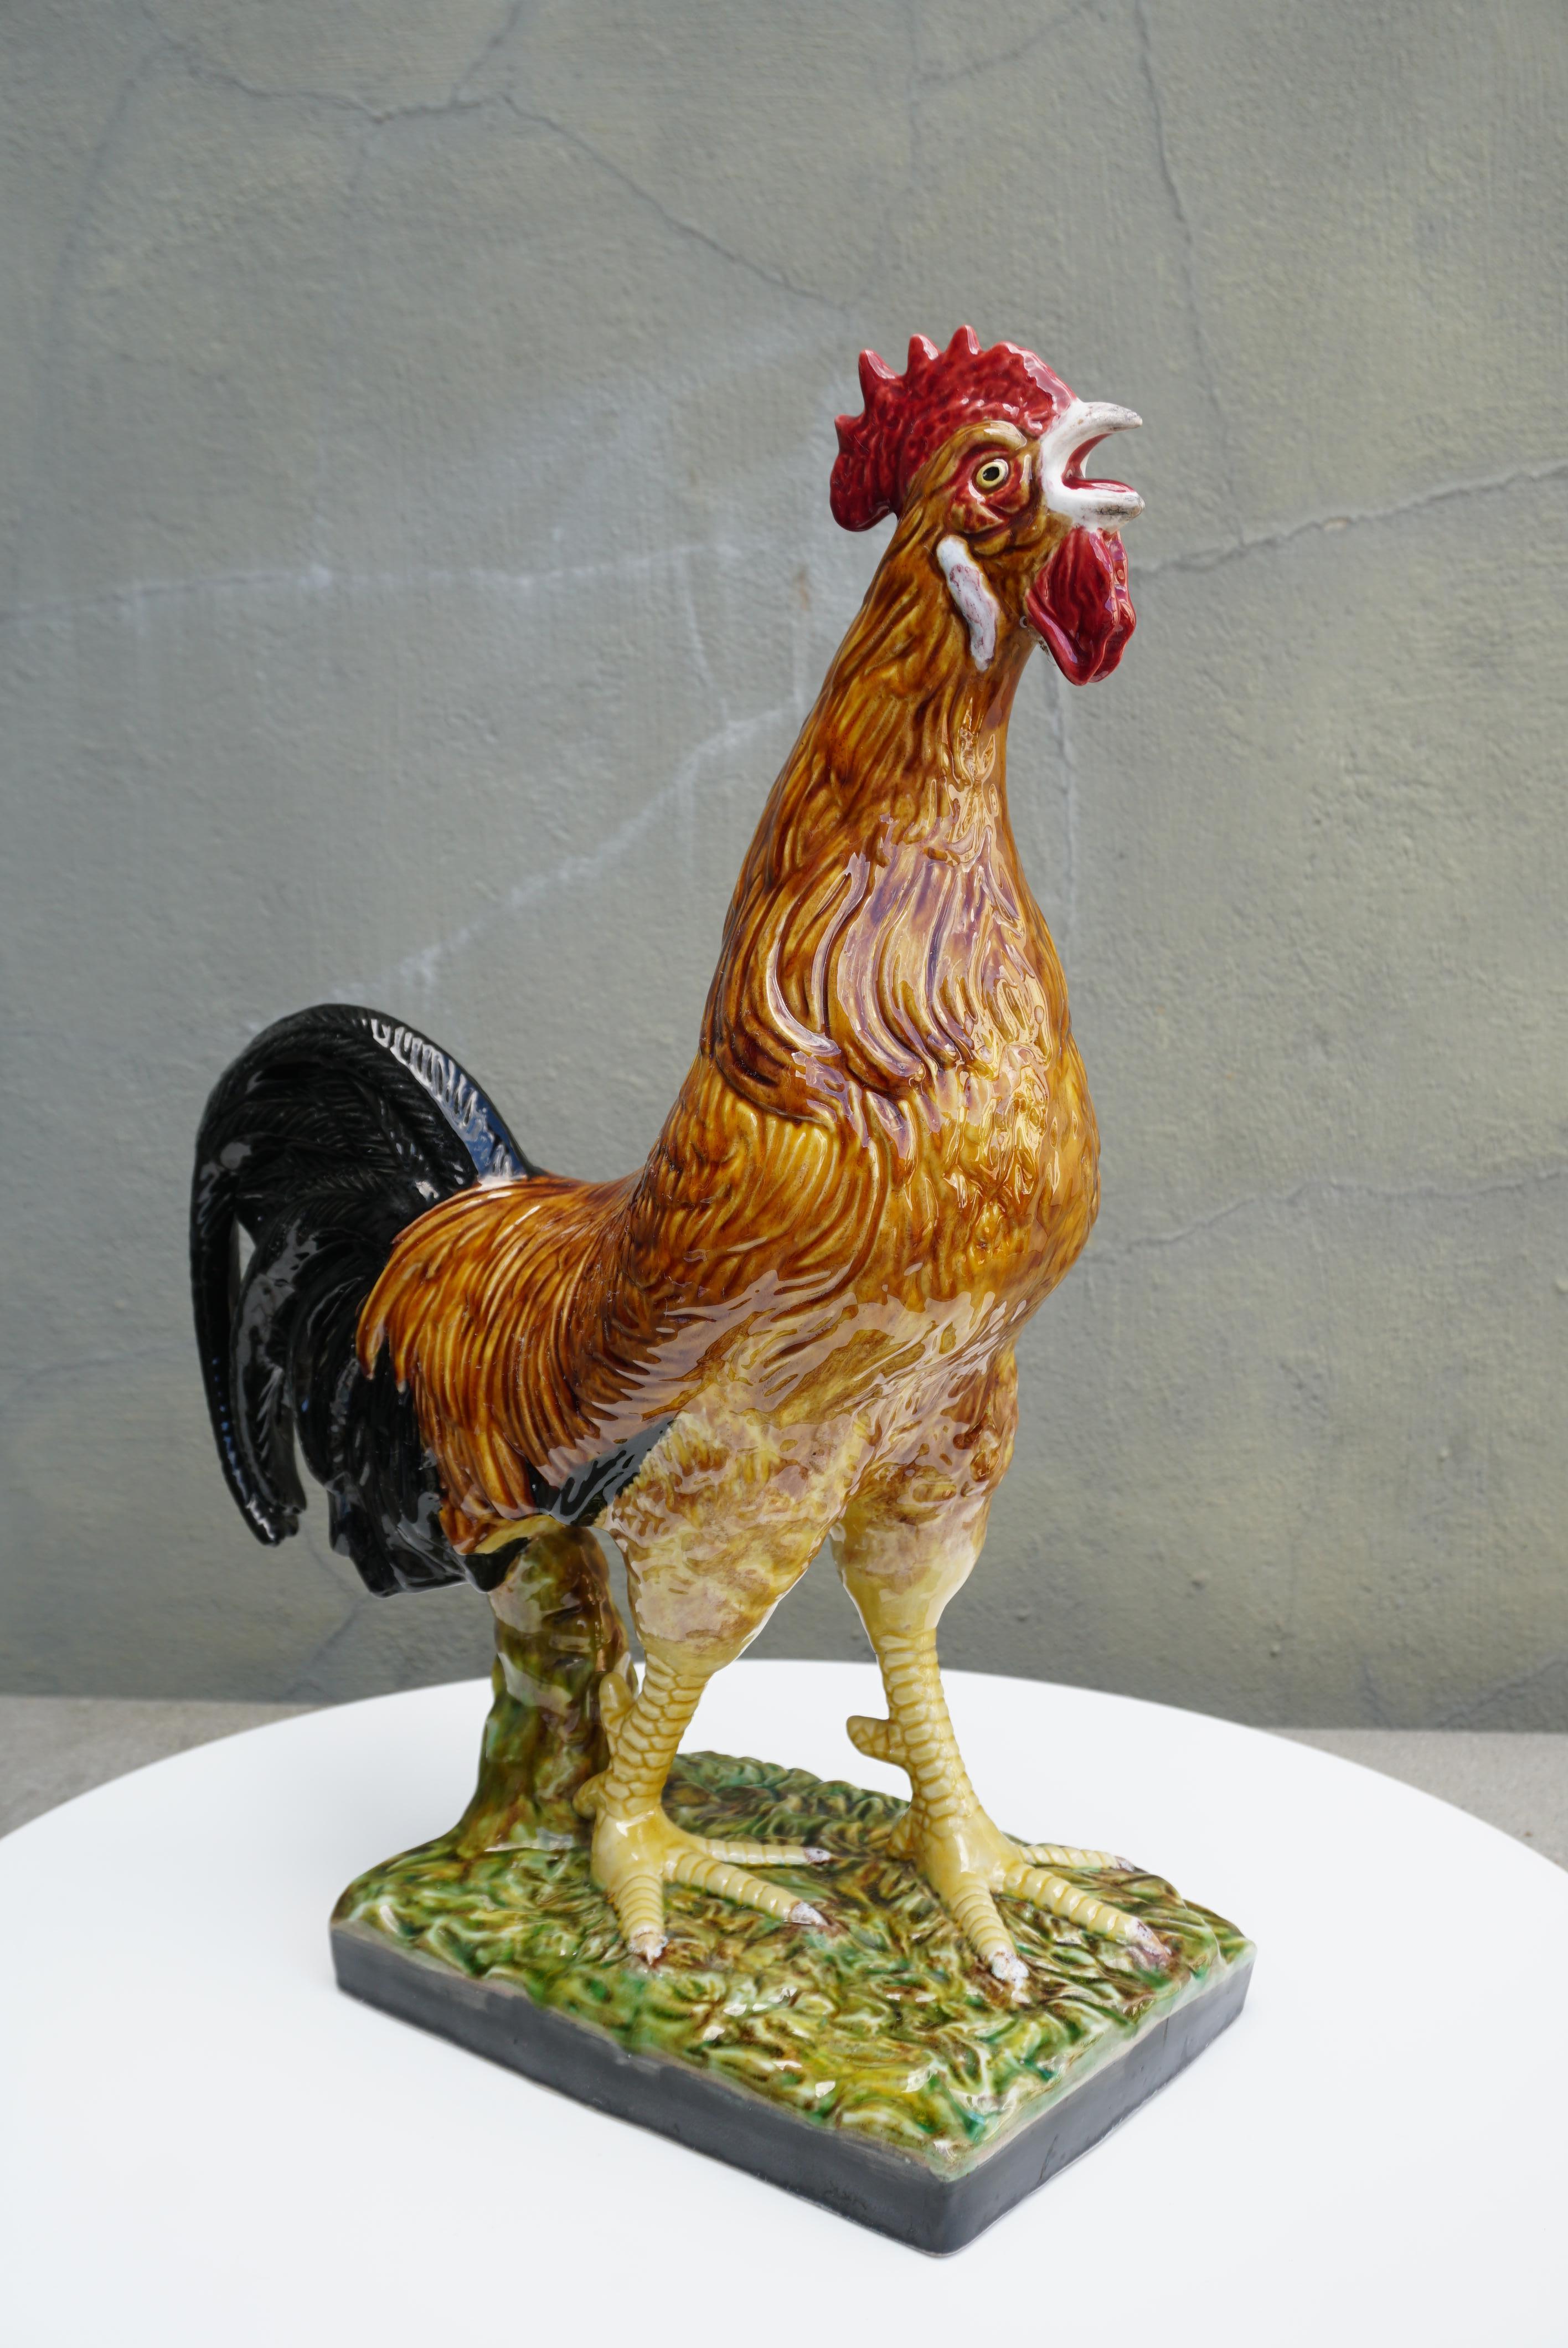 Add the charm of the French countryside to your home with this large, colorful and rare ceramic rooster sculpture. Crafted in France circa 1960 in the style of Paul Comolera or Louis Carrier Belleuse. The elegant barbotine sculpture is hand painted